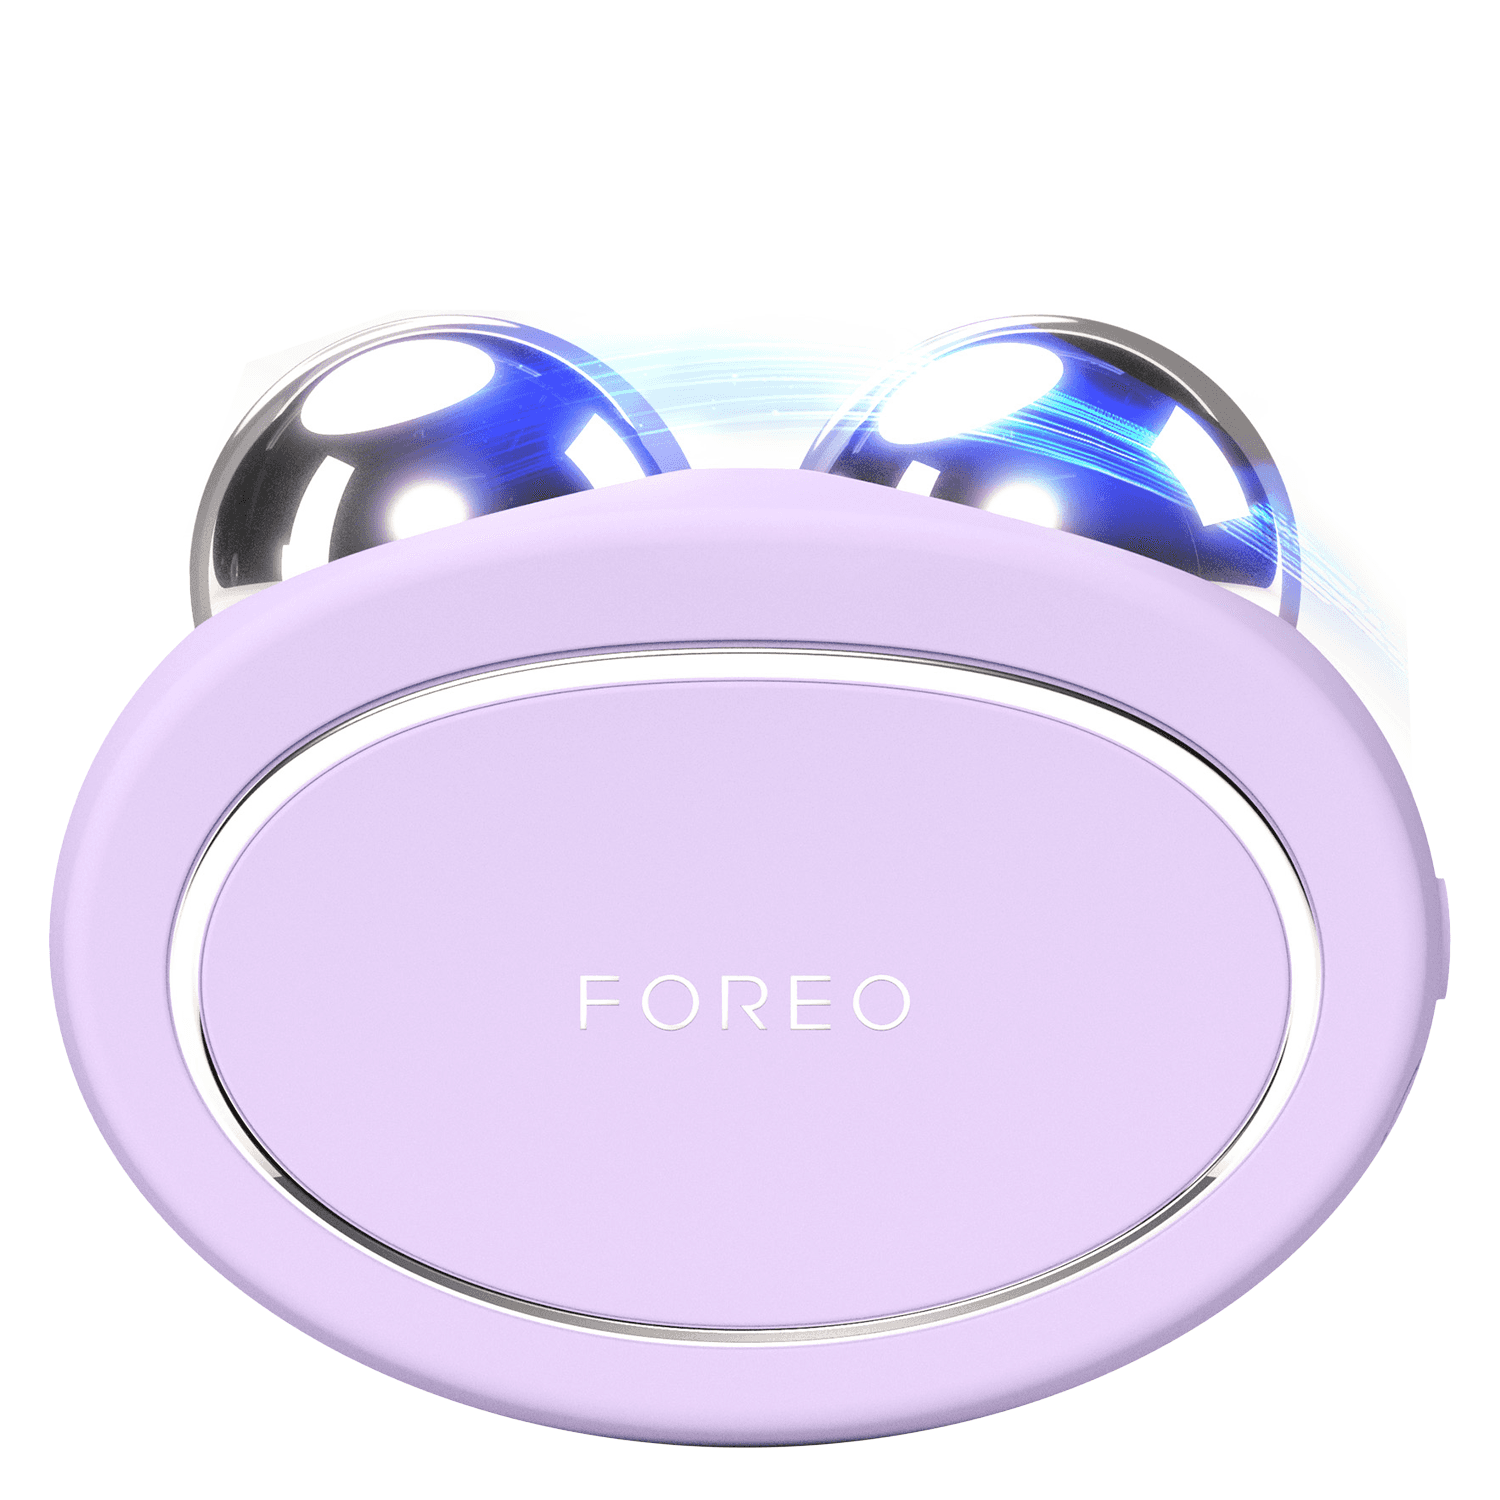 BEAR™ 2 - Advanced Microcurrent Full-Facial Toning Device Lavender